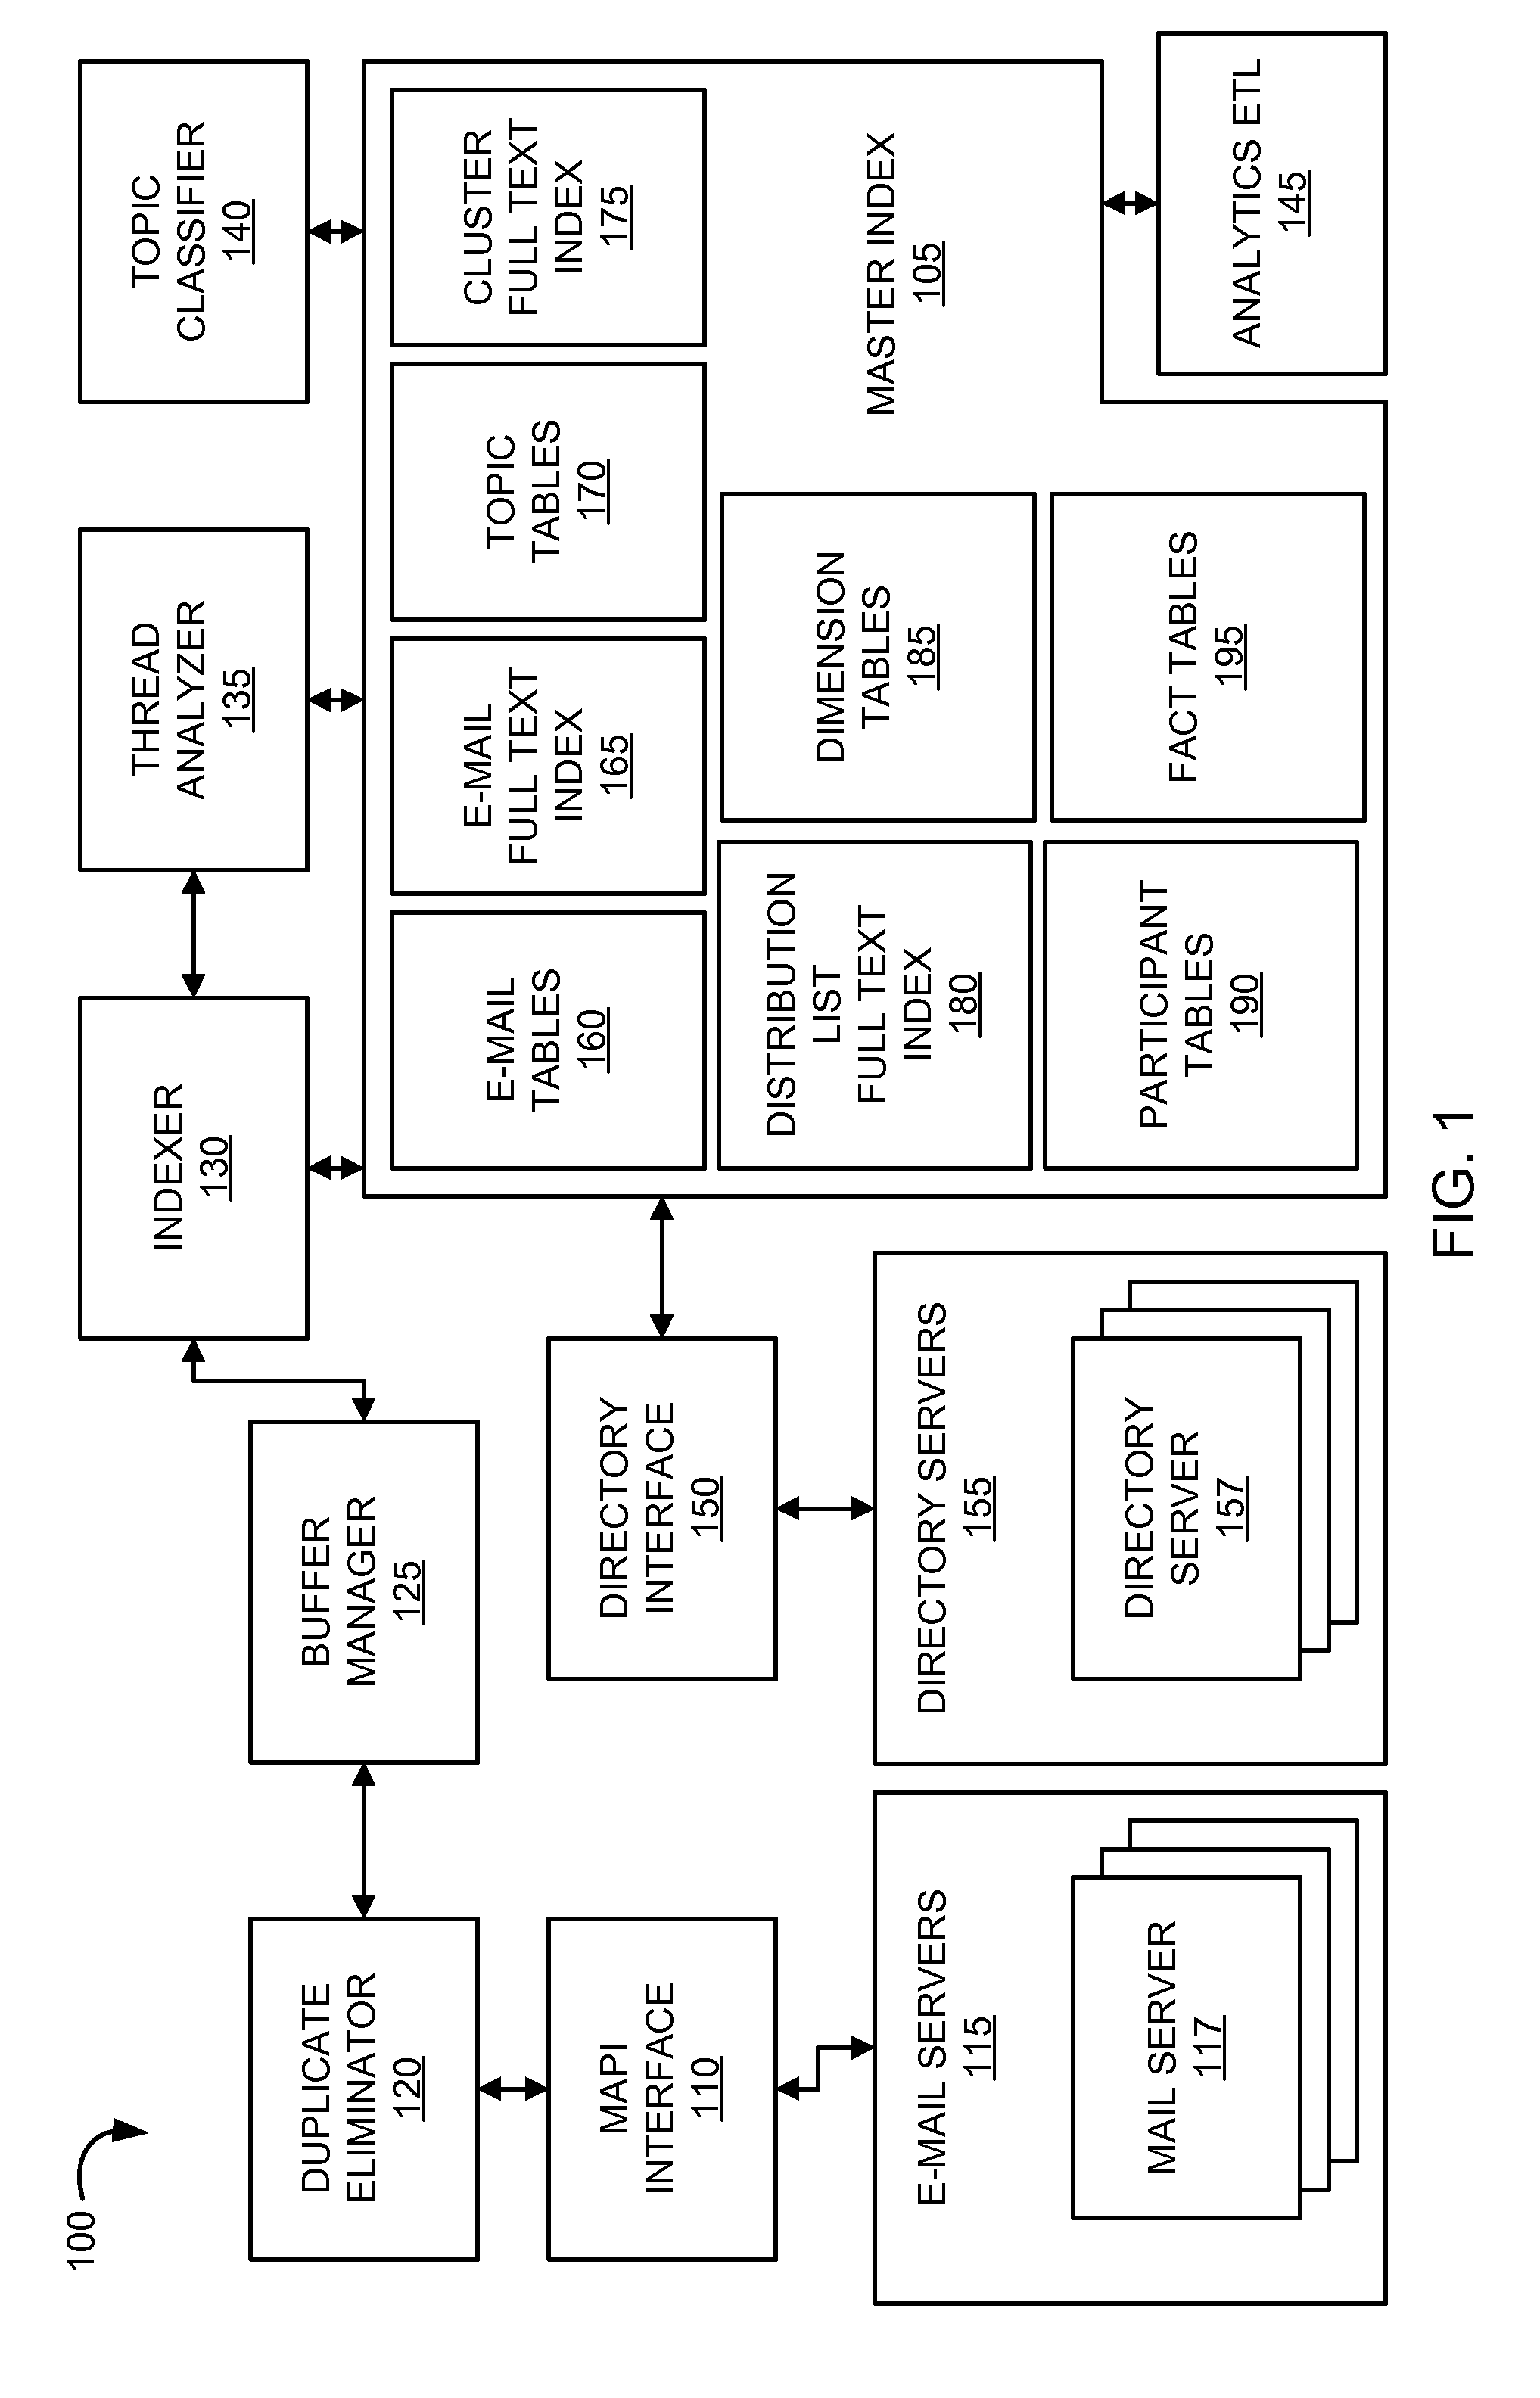 Methods, systems, and user interface for e-mail search and retrieval